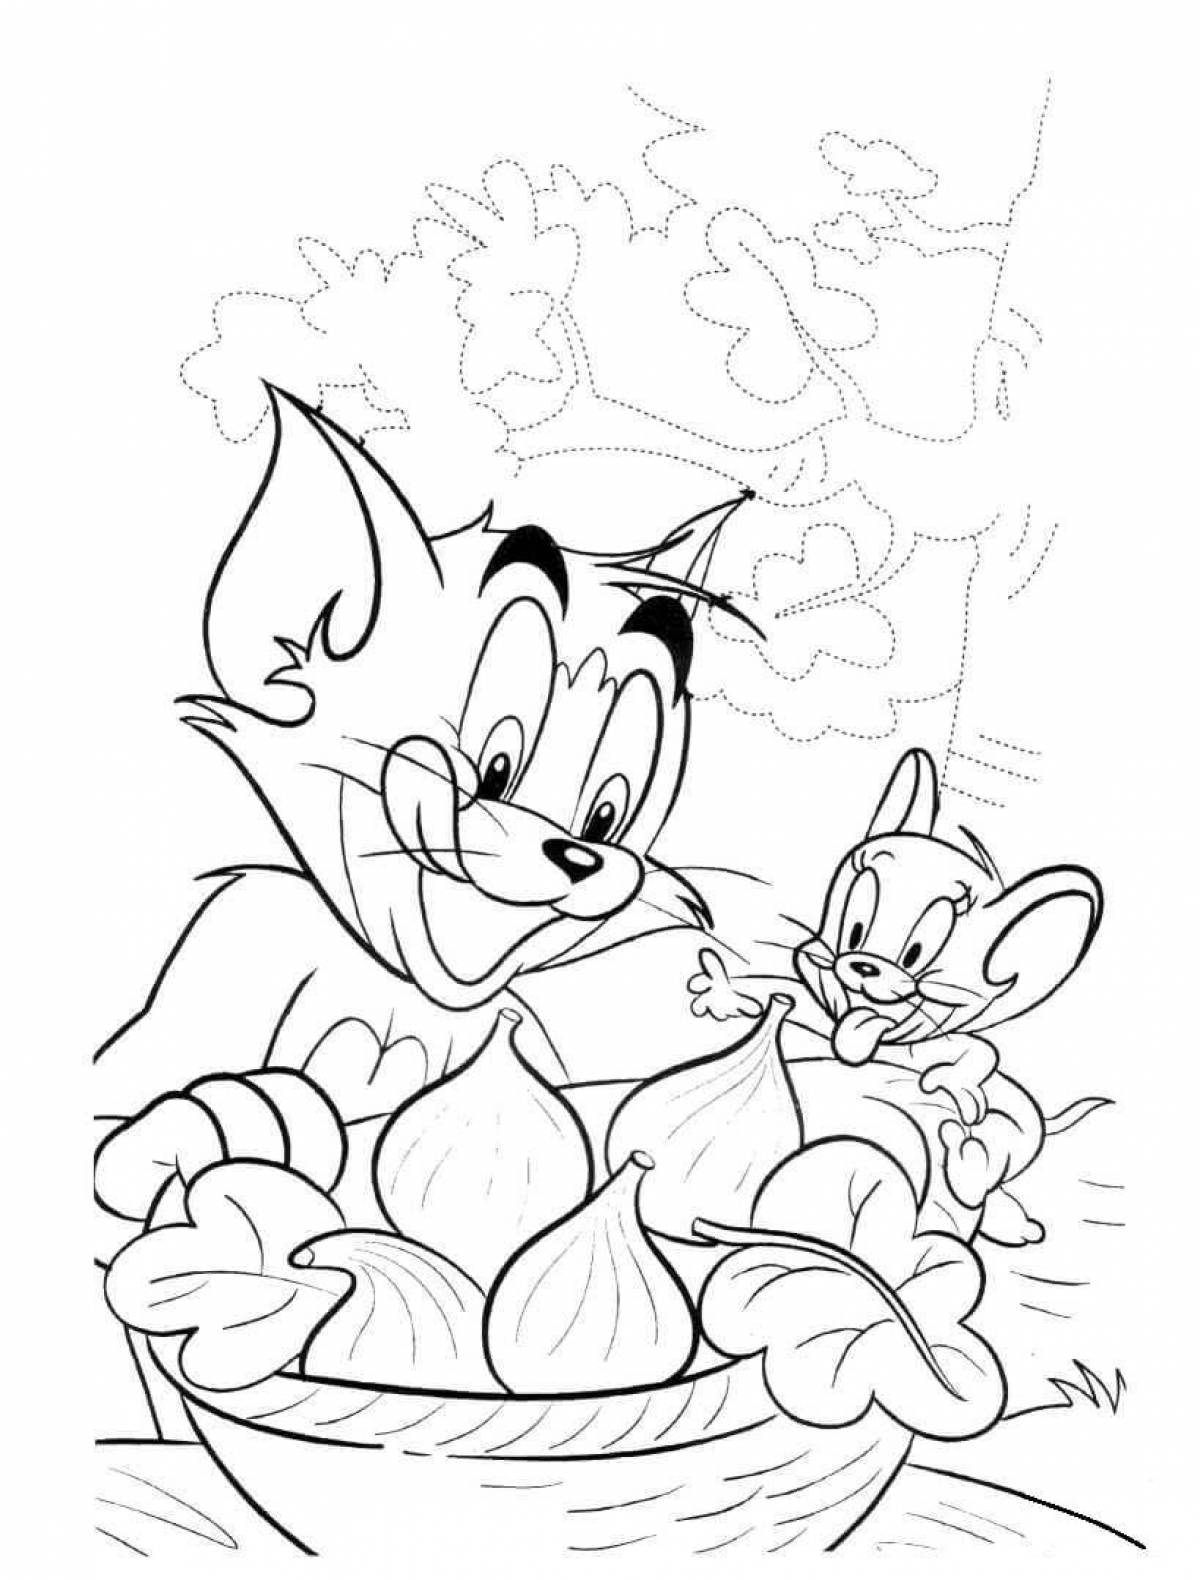 Incredible tom and jerry coloring book for kids